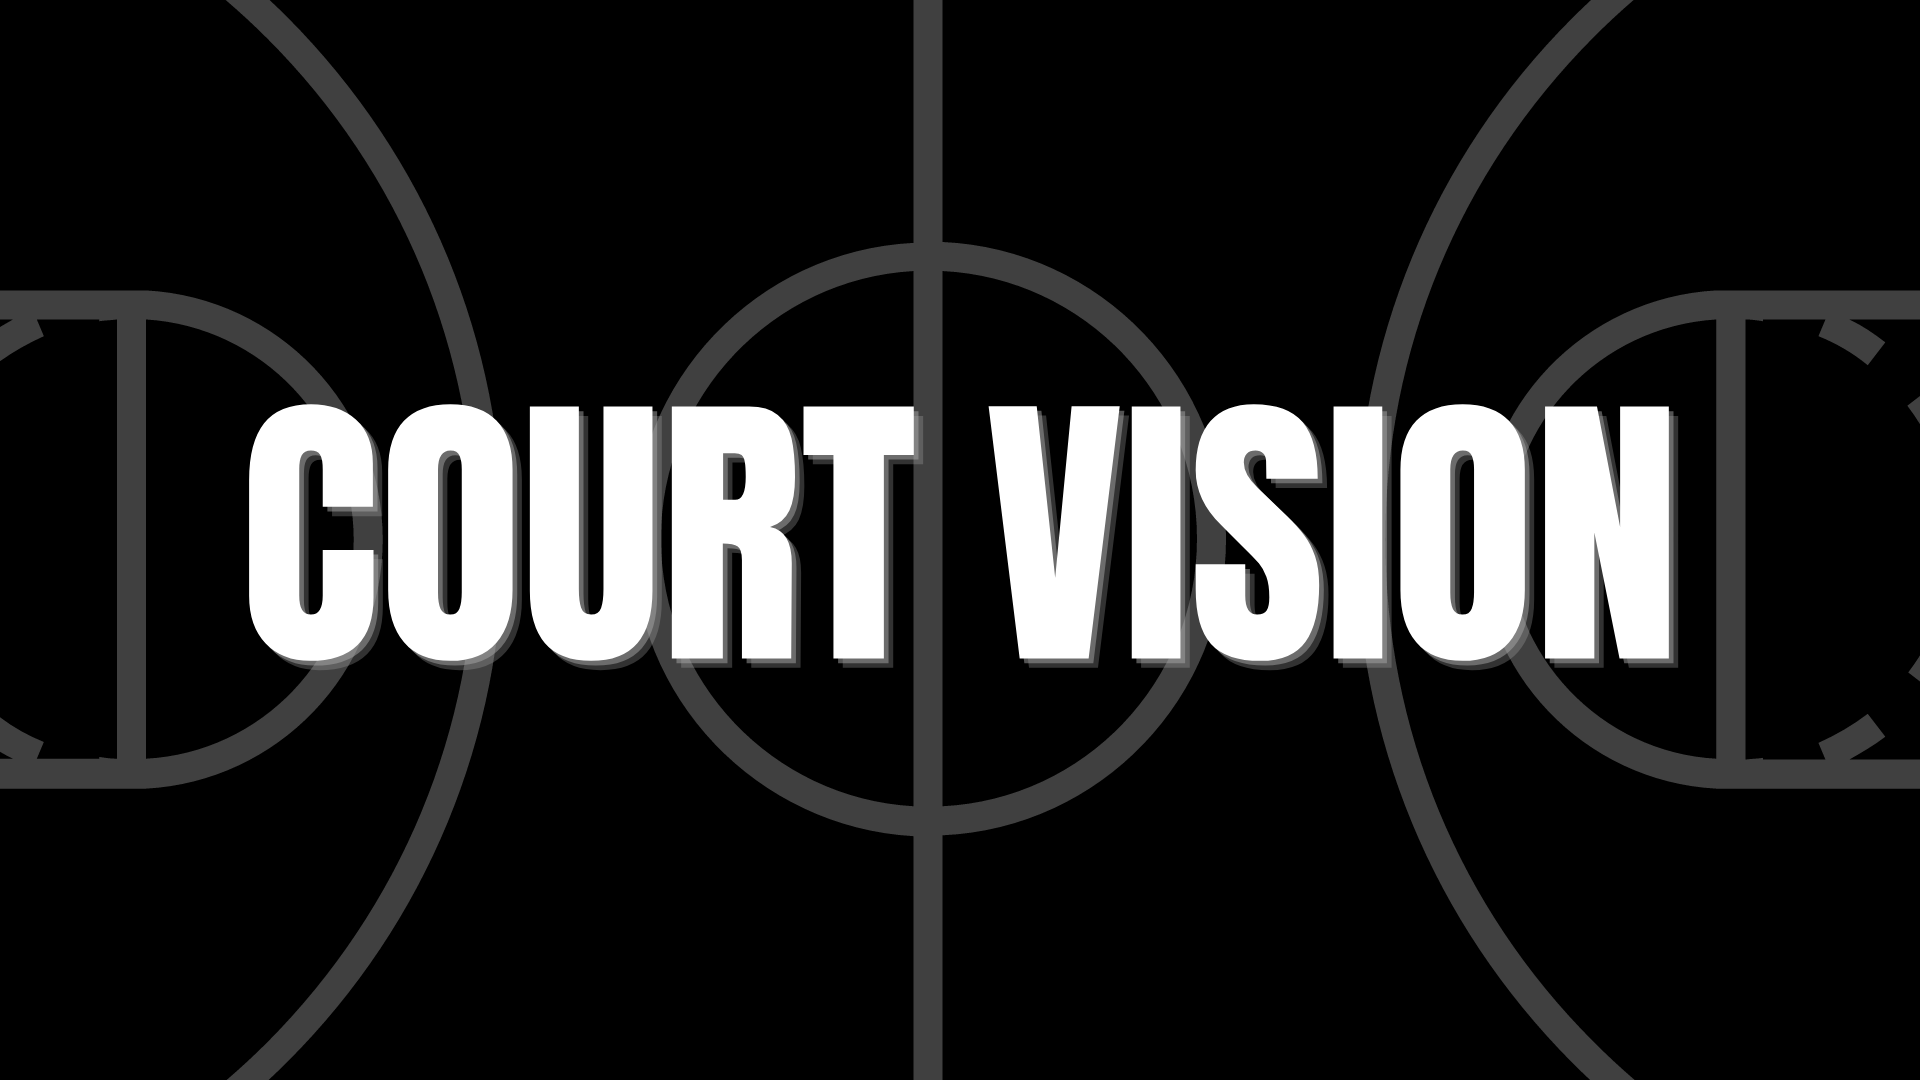 Court Vision: The Details Behind Aniah Alexis